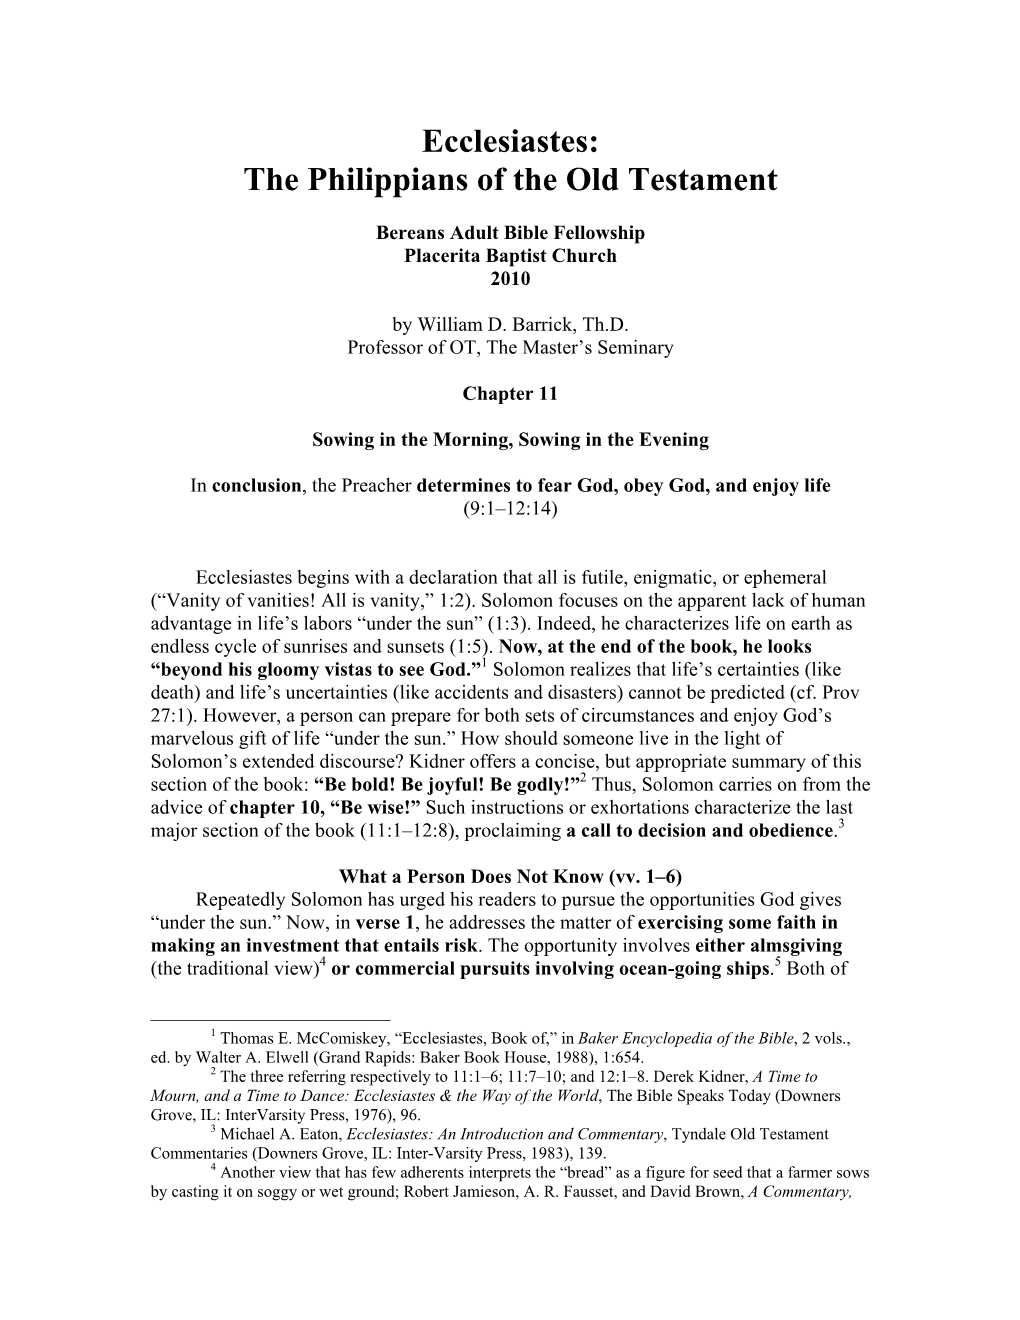 Ecclesiastes: the Philippians of the Old Testament